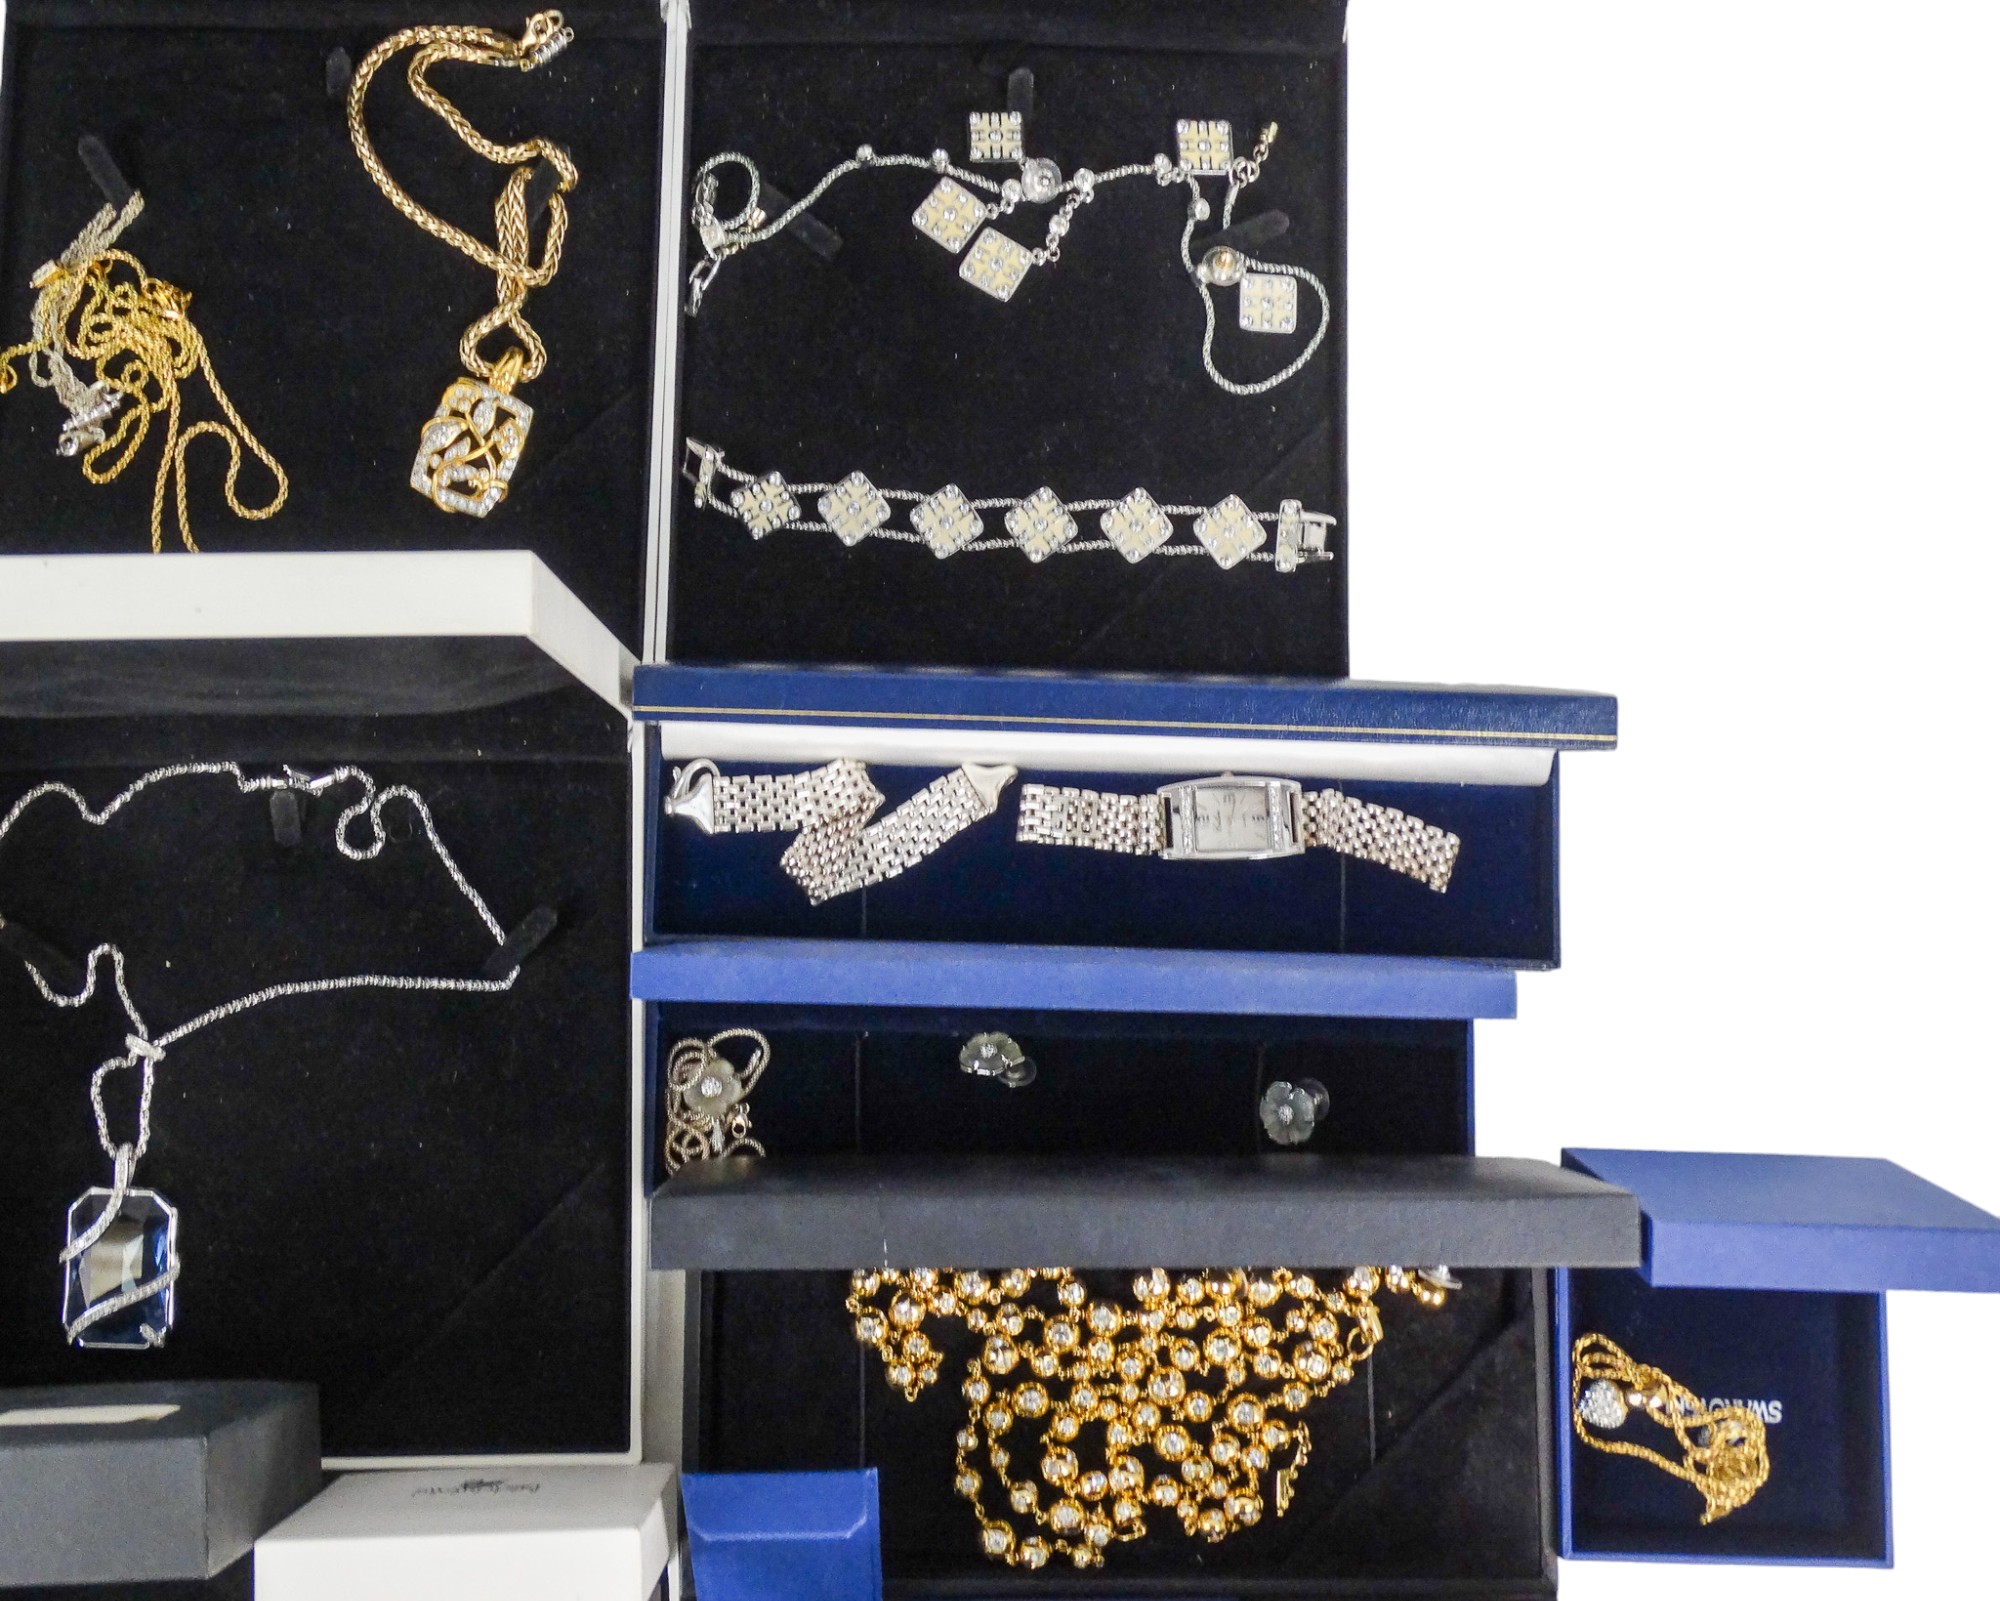 A quantity of Swarovski costume jewellery - many items with original retail boxes - Image 4 of 5